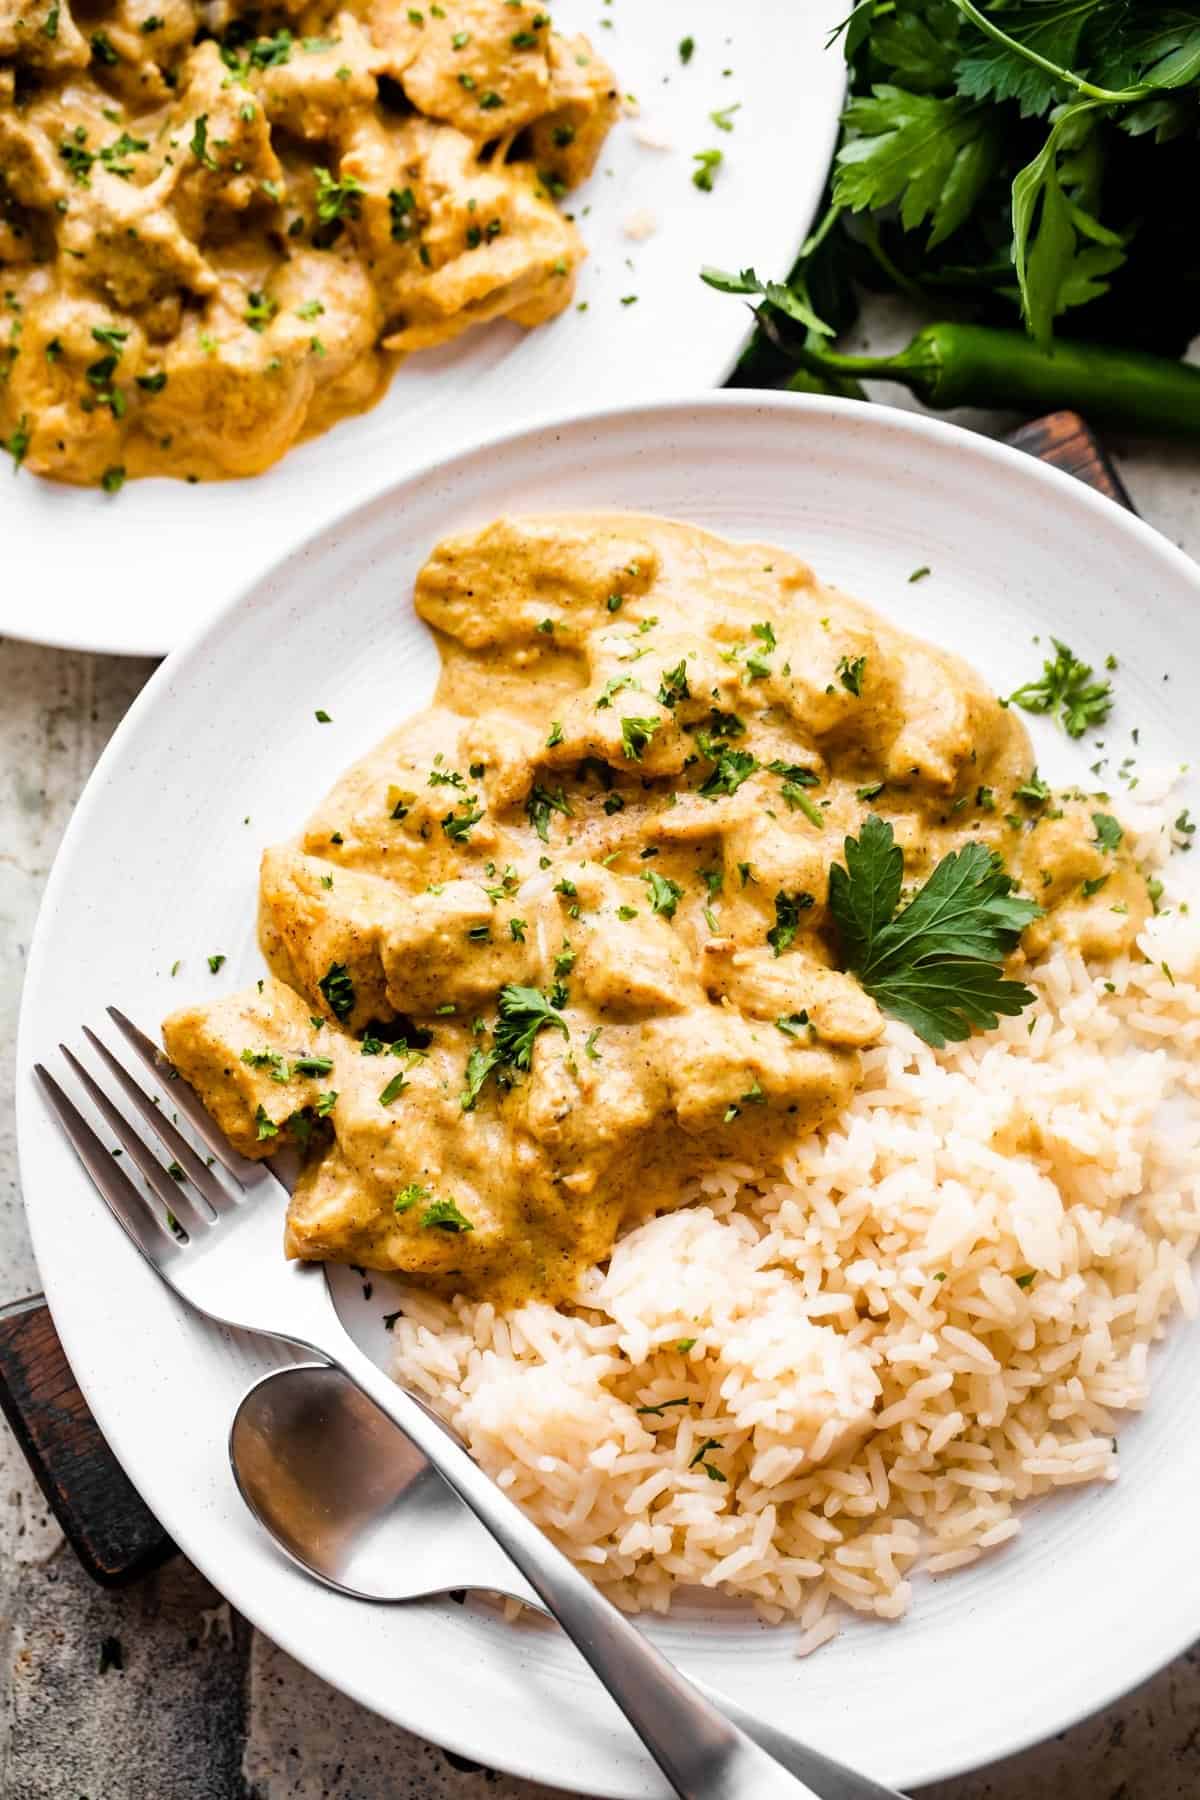 chicken korma served alongside some rice and topped with chopped cilantro.